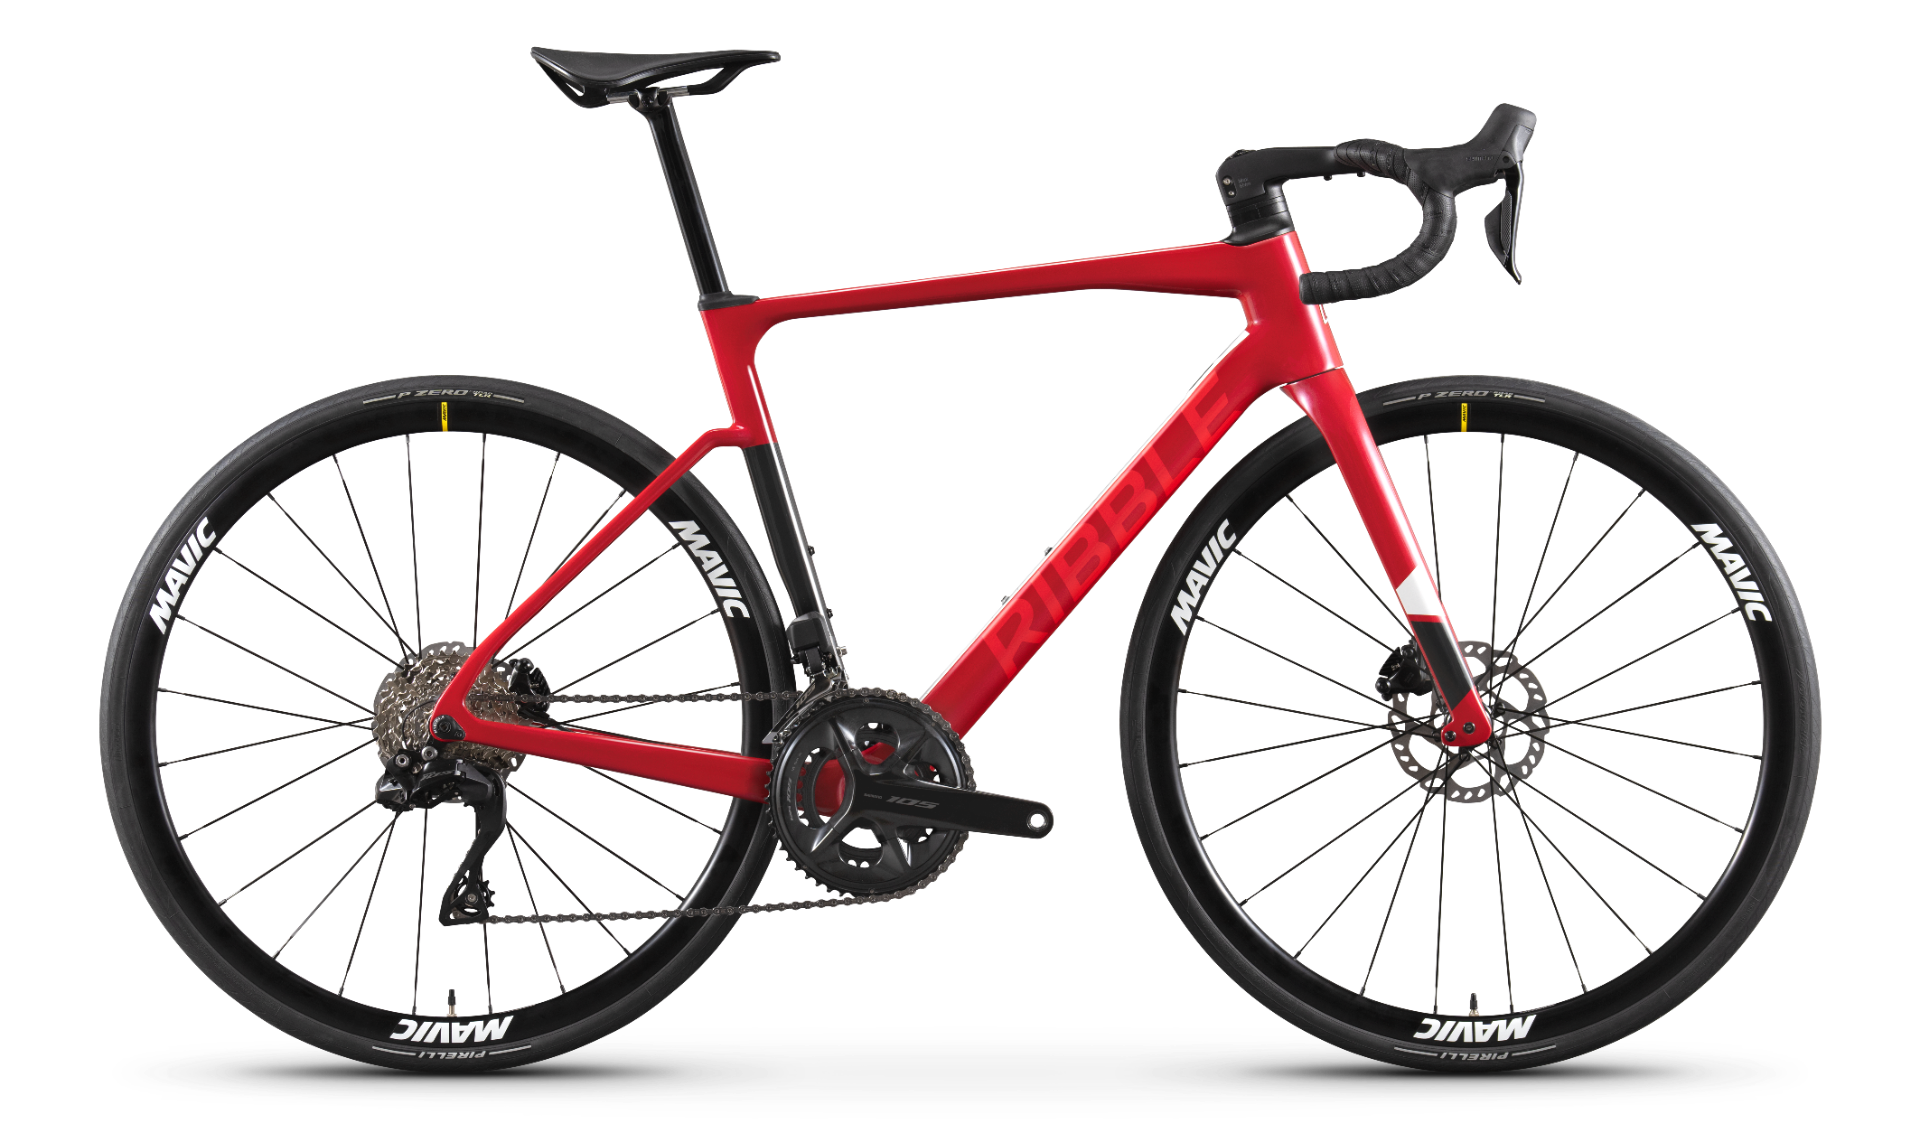 Ribble Endurance SL Disc - Enthusiast from Ribble Cycles